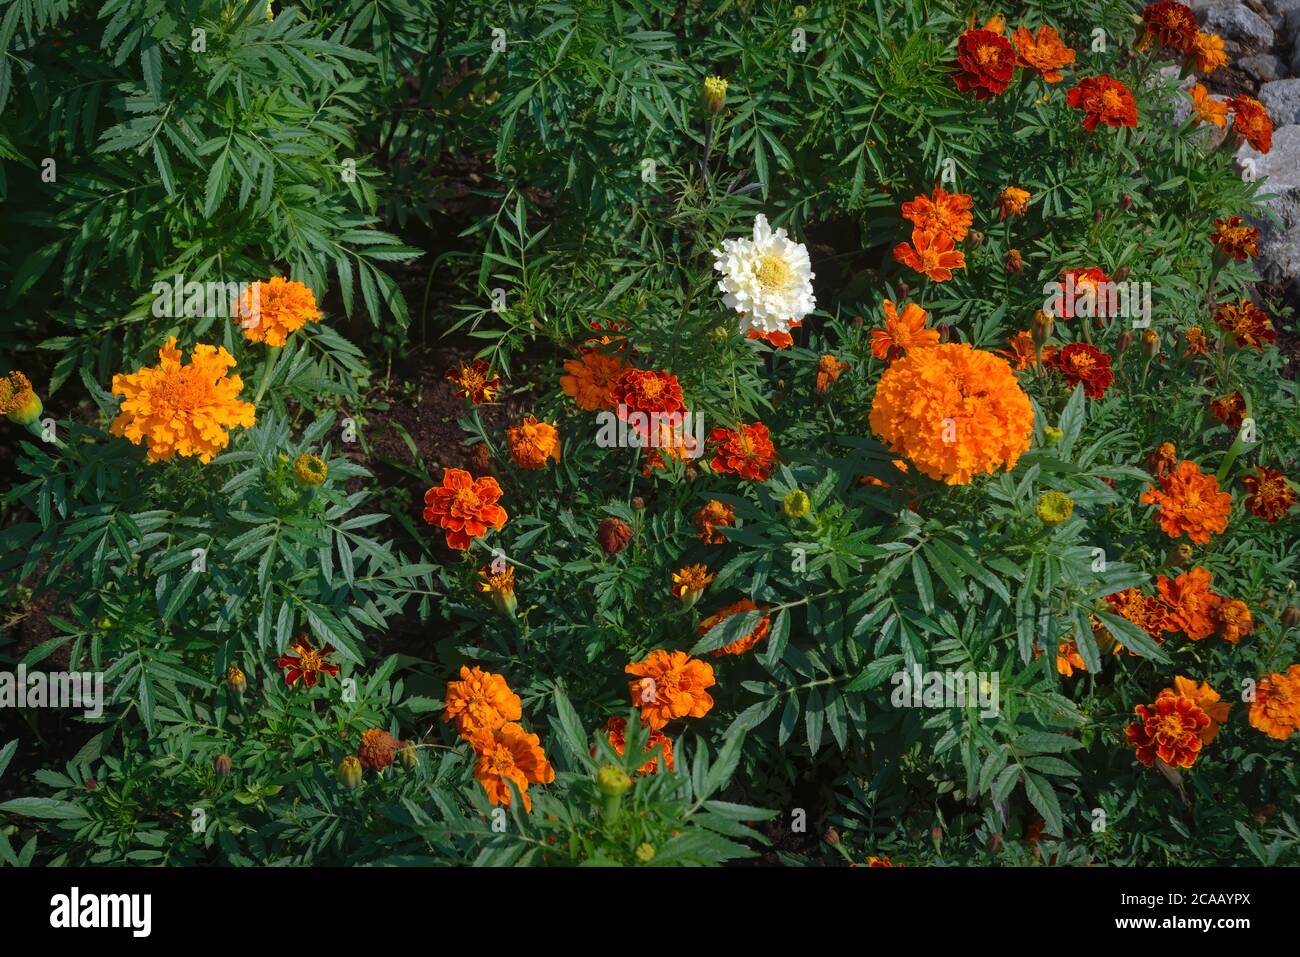 Beautiful Marigold Flowers And Leaves In The Flower Bed Stock Photo Alamy